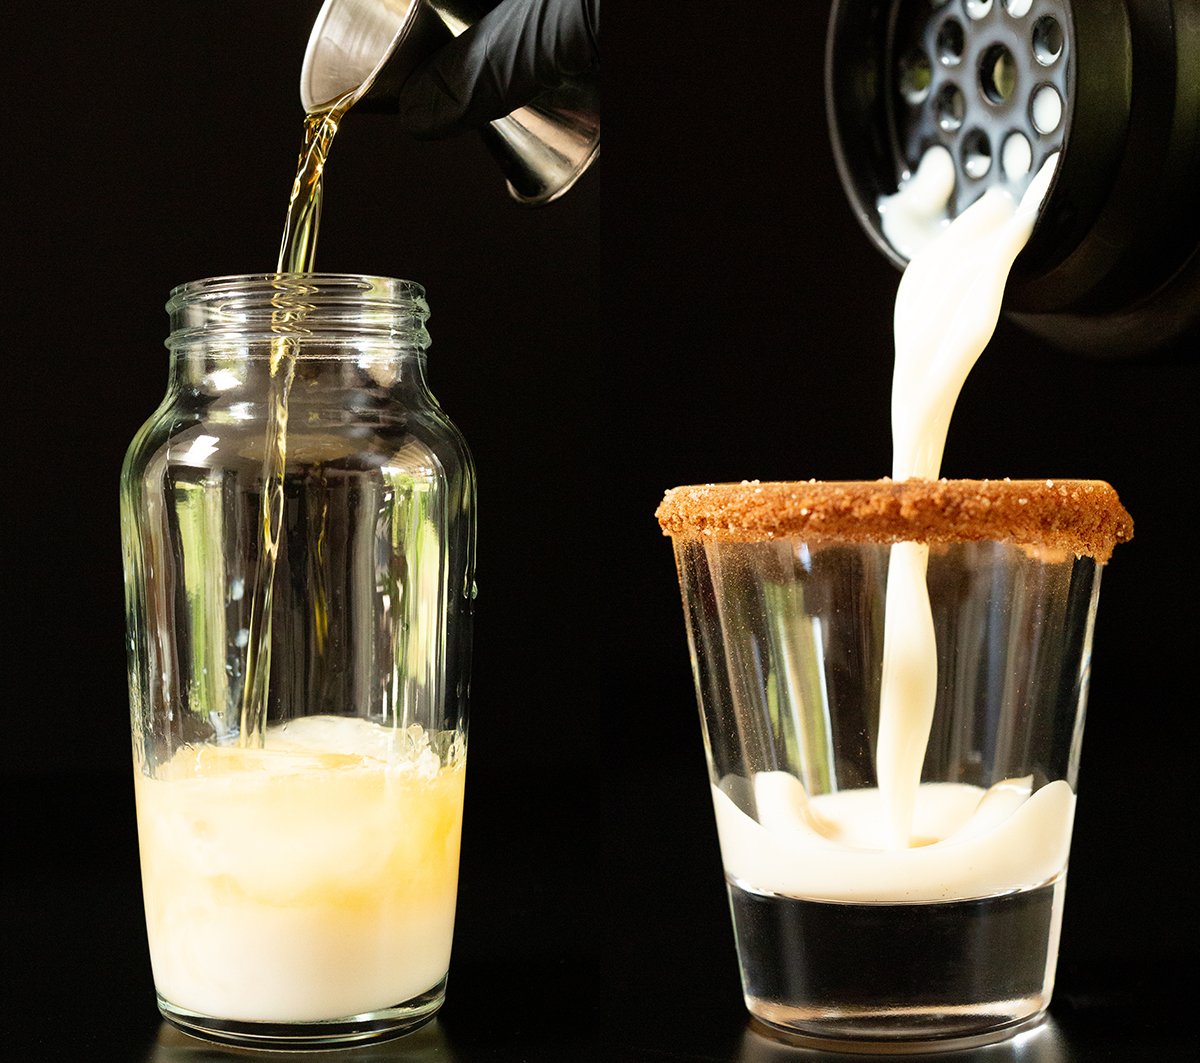 A two photo collage showing the ingredients for a Cinnamon Toast Crunch shot being added to a cocktail shaker, then strained in to a shot glass.